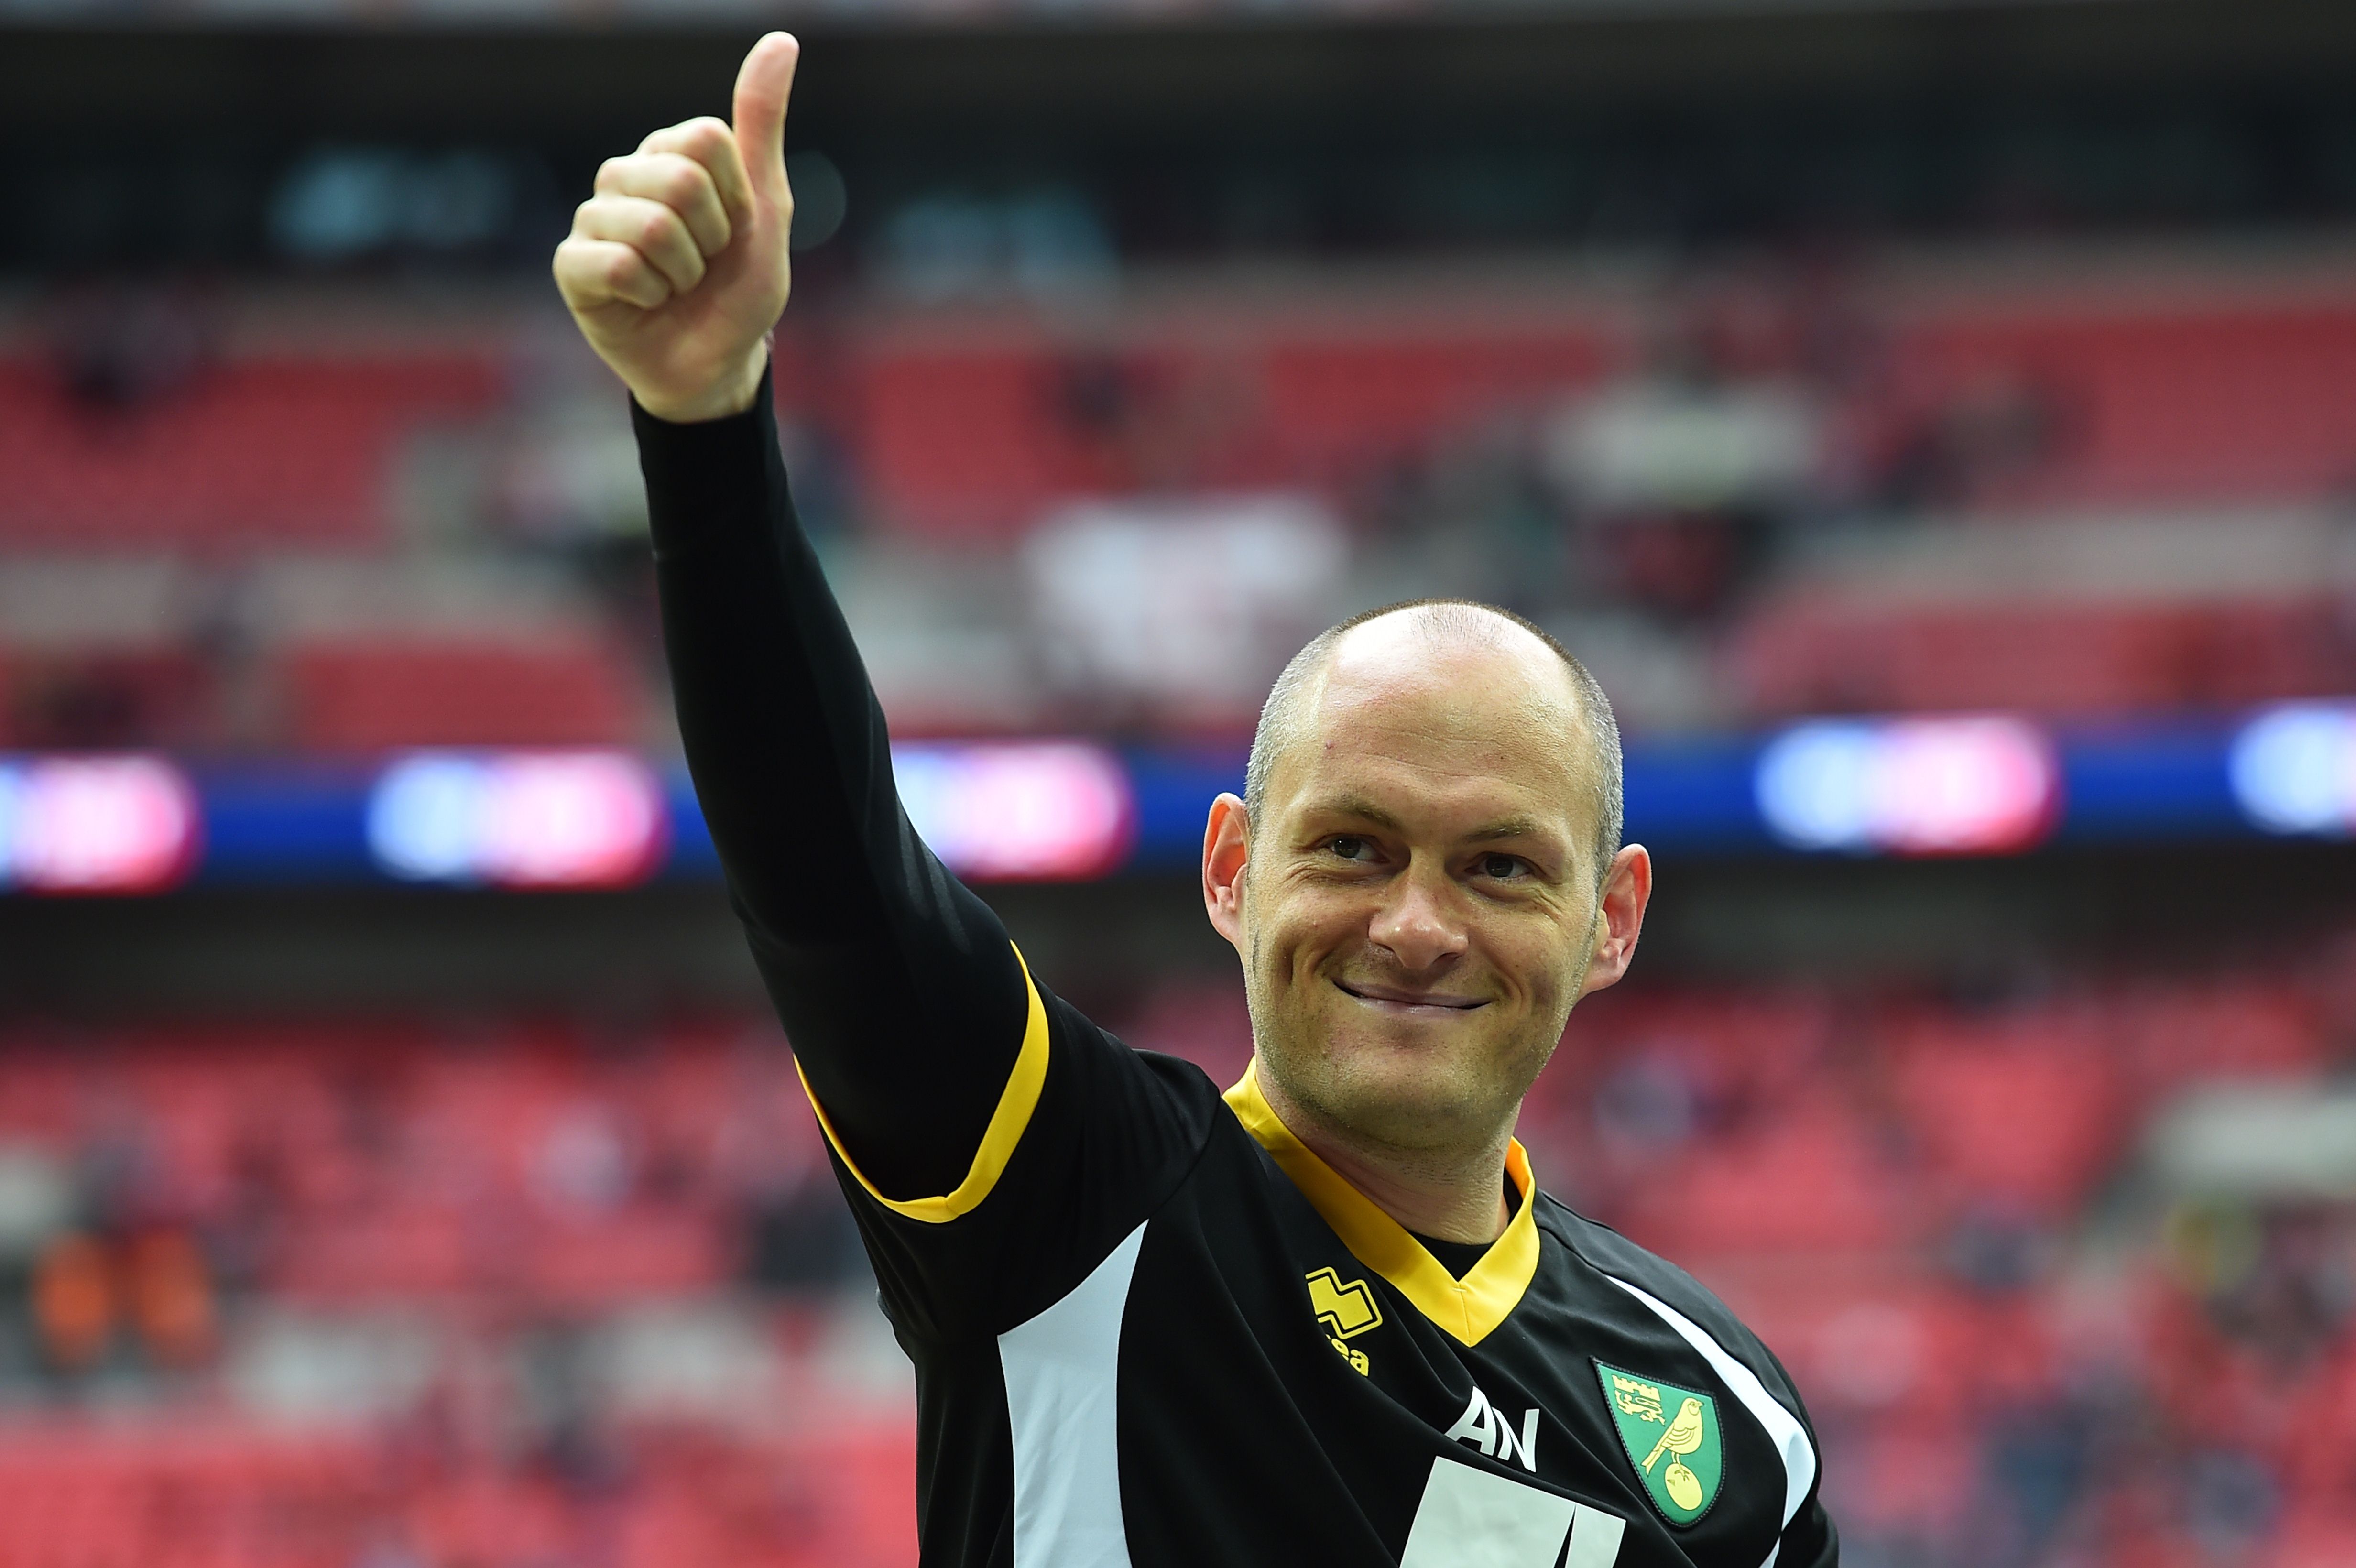 Alex Neil was in charge of small Scottish club Hamilton Academical at the start of the season. Photo: AFP